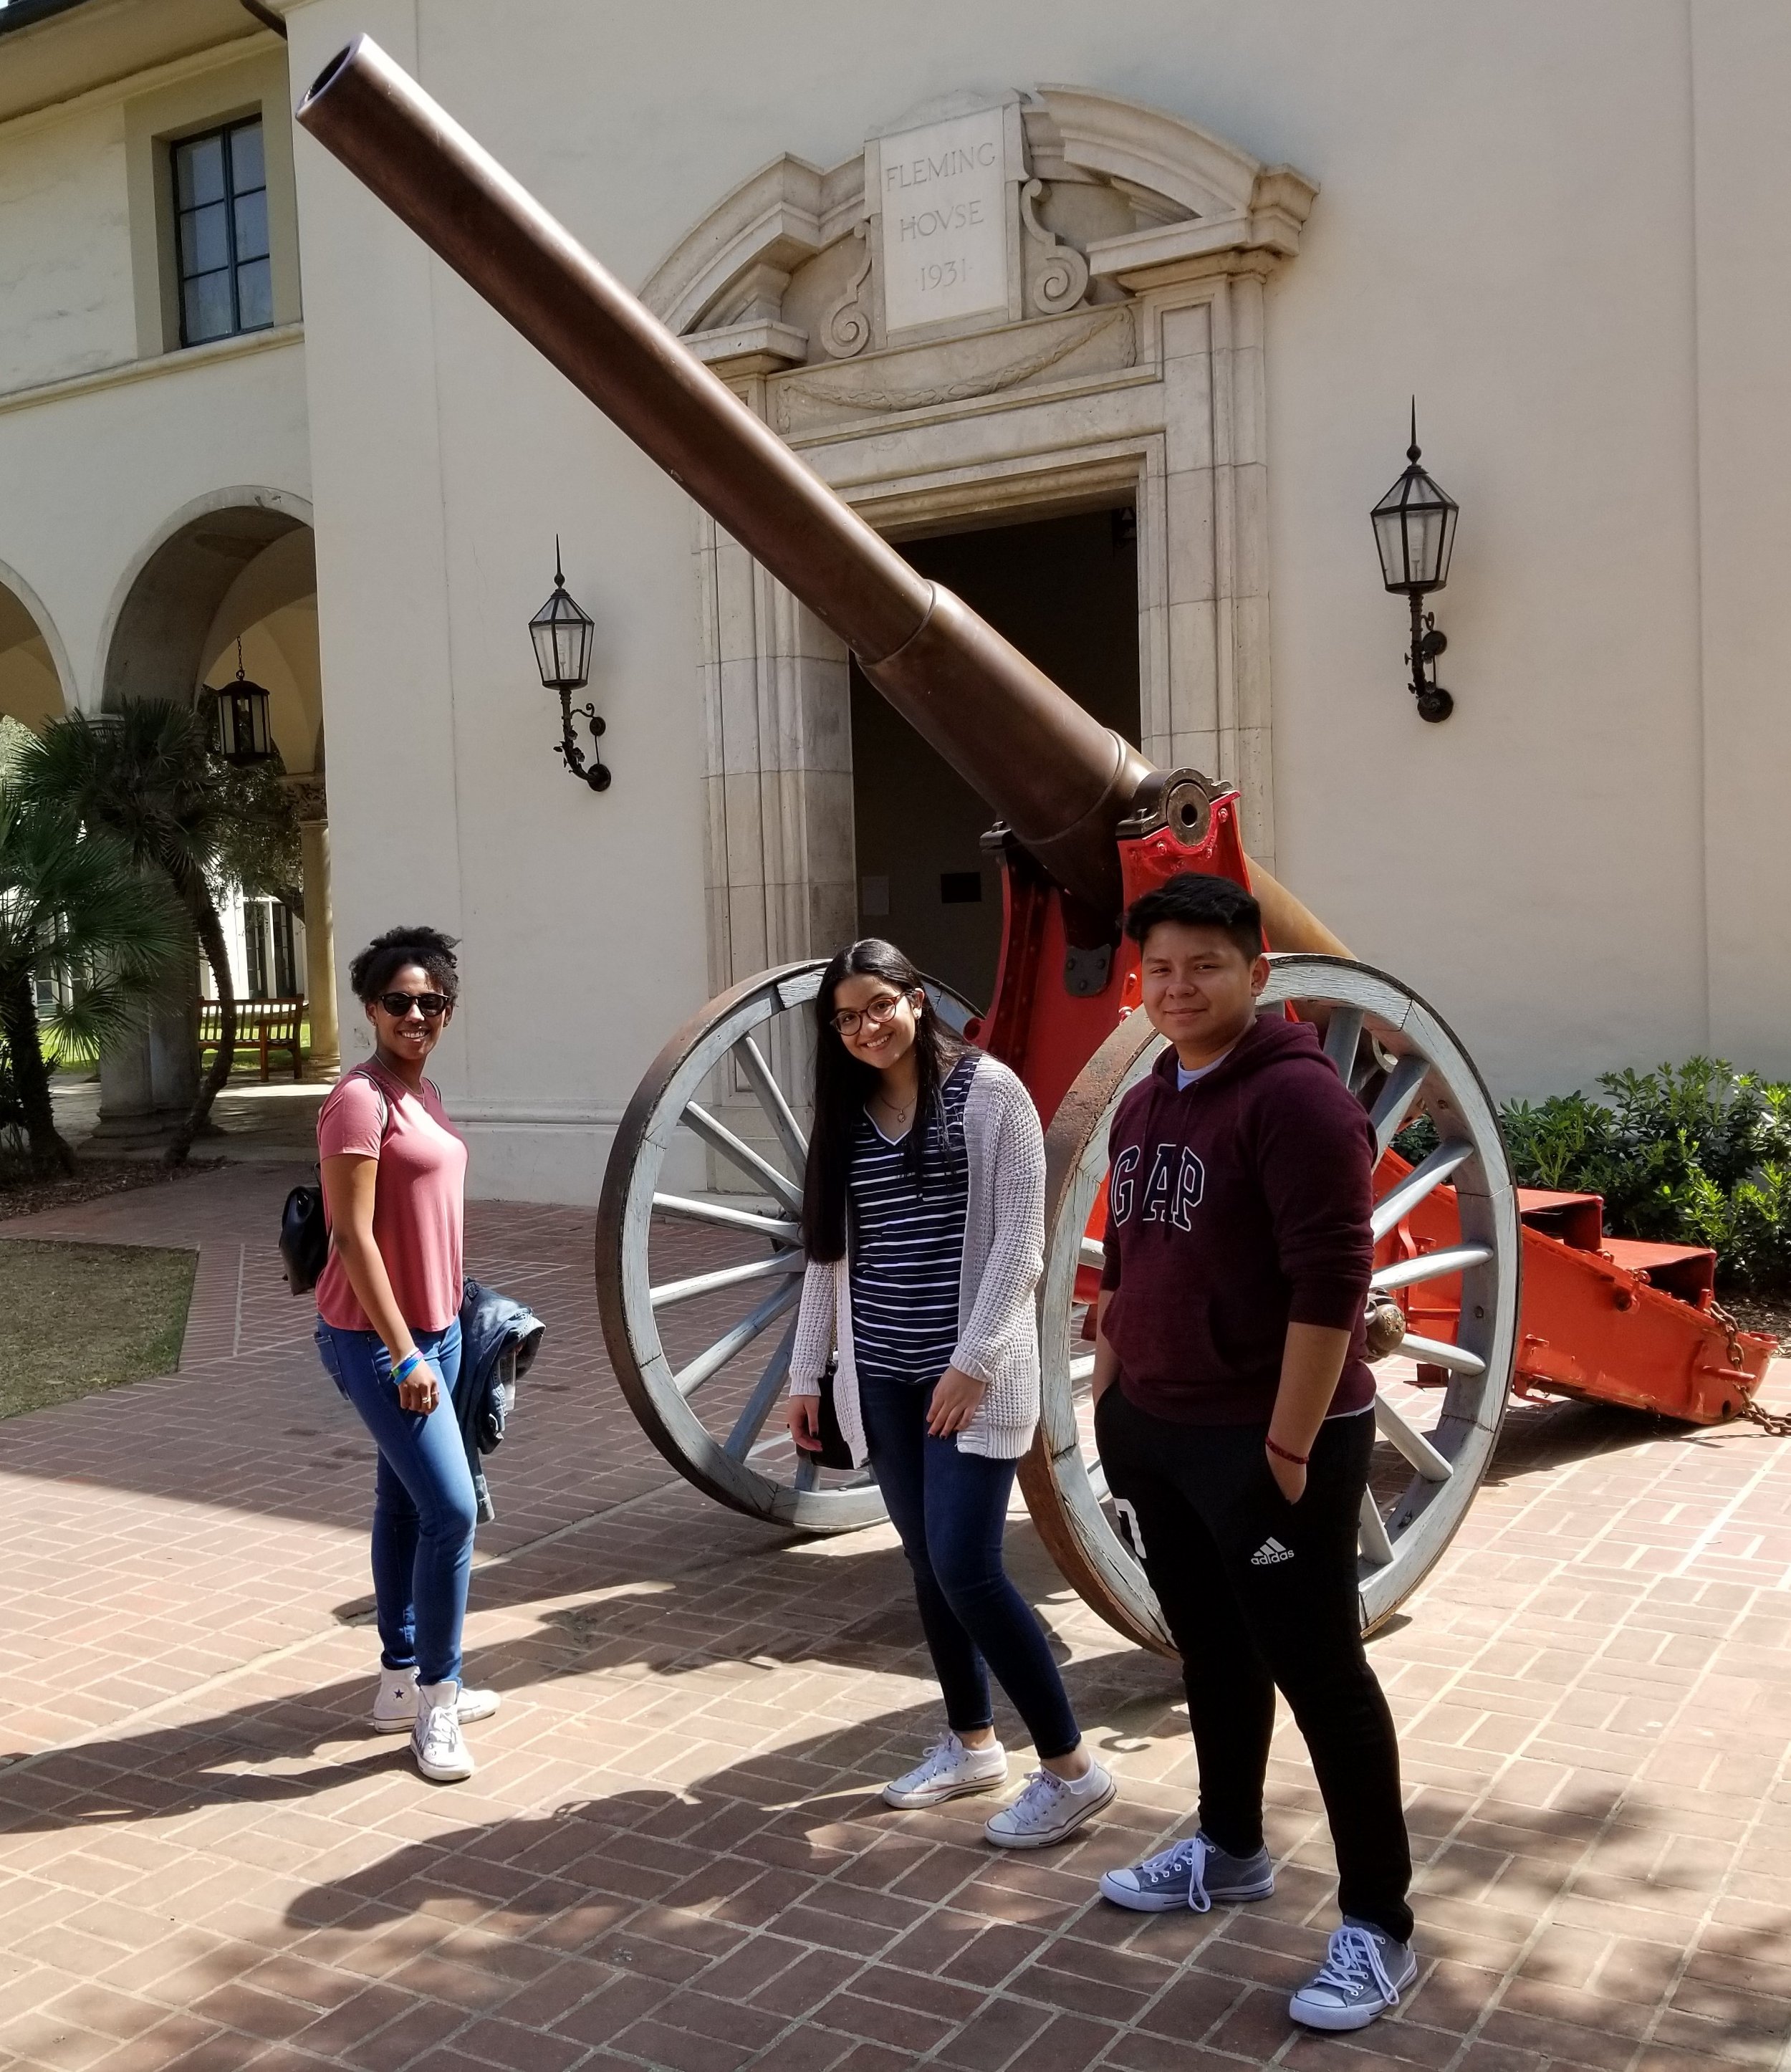  Zeñia visited Caltech with fellow pathway students Maria and Teo in 2018. 